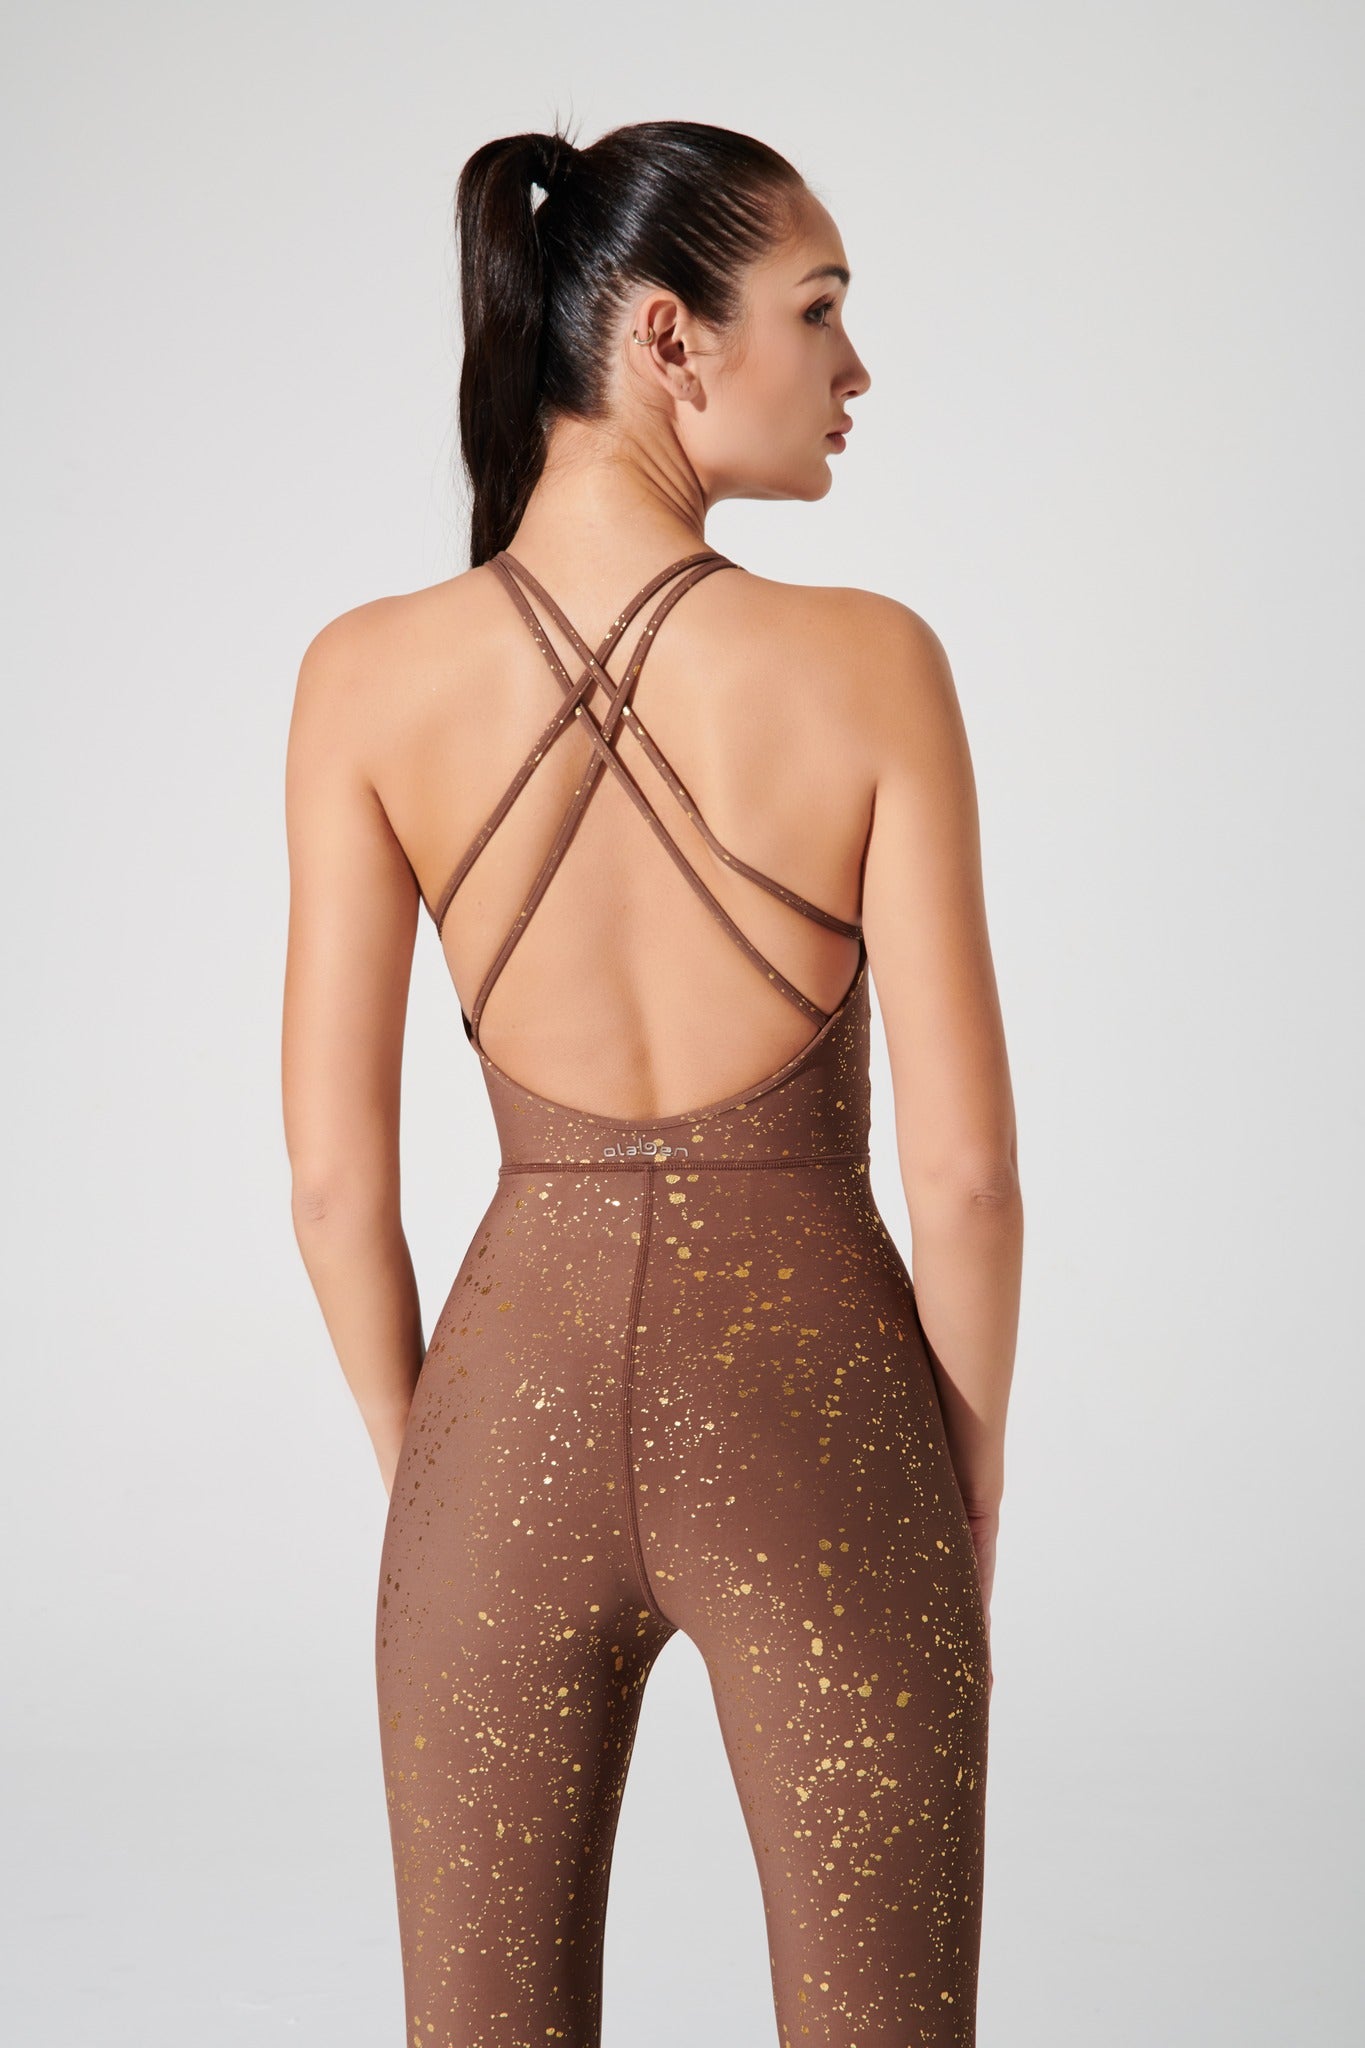 Stylish women's bronze brown jumpsuit with a luminous touch - OW-0117-WJU-BN_1.jpg.